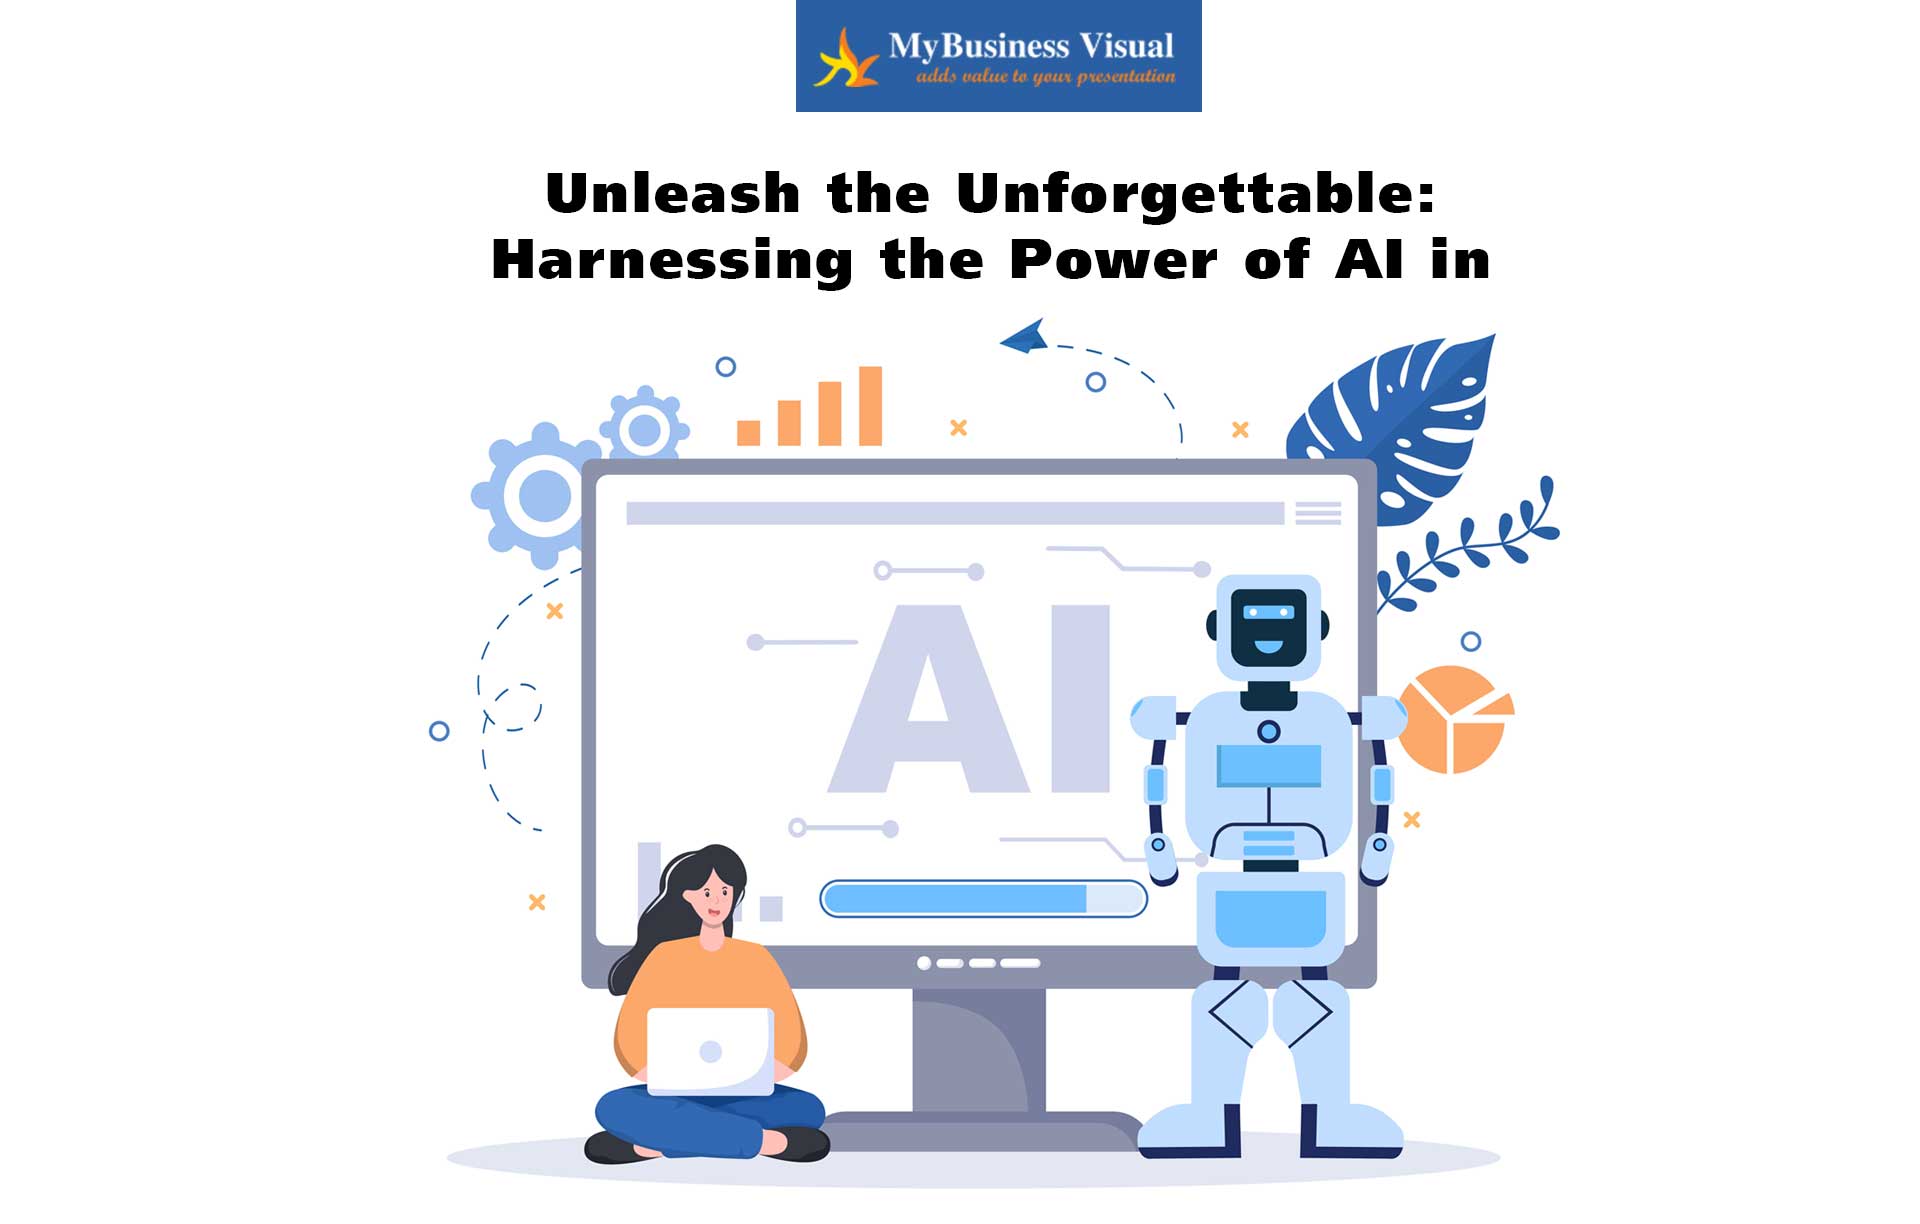 Unleash the Unforgettable: Harnessing the Power of AI in Presentations